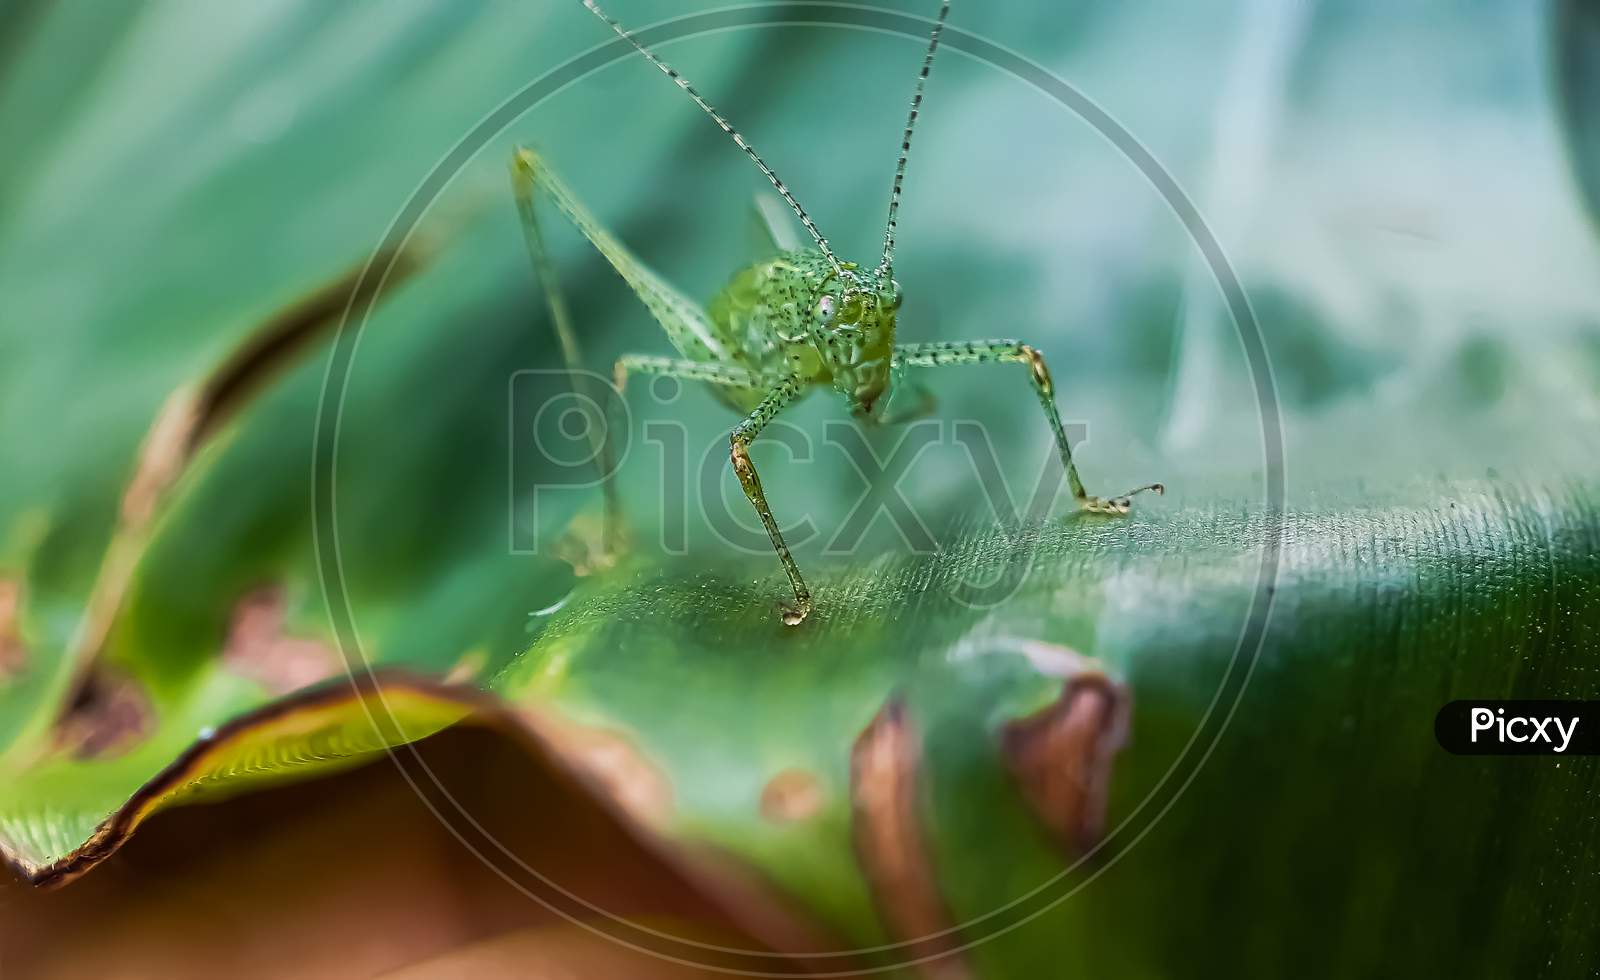 In The Garden A Green Insect Is Sitting On The Leaves And Has A Green Background.